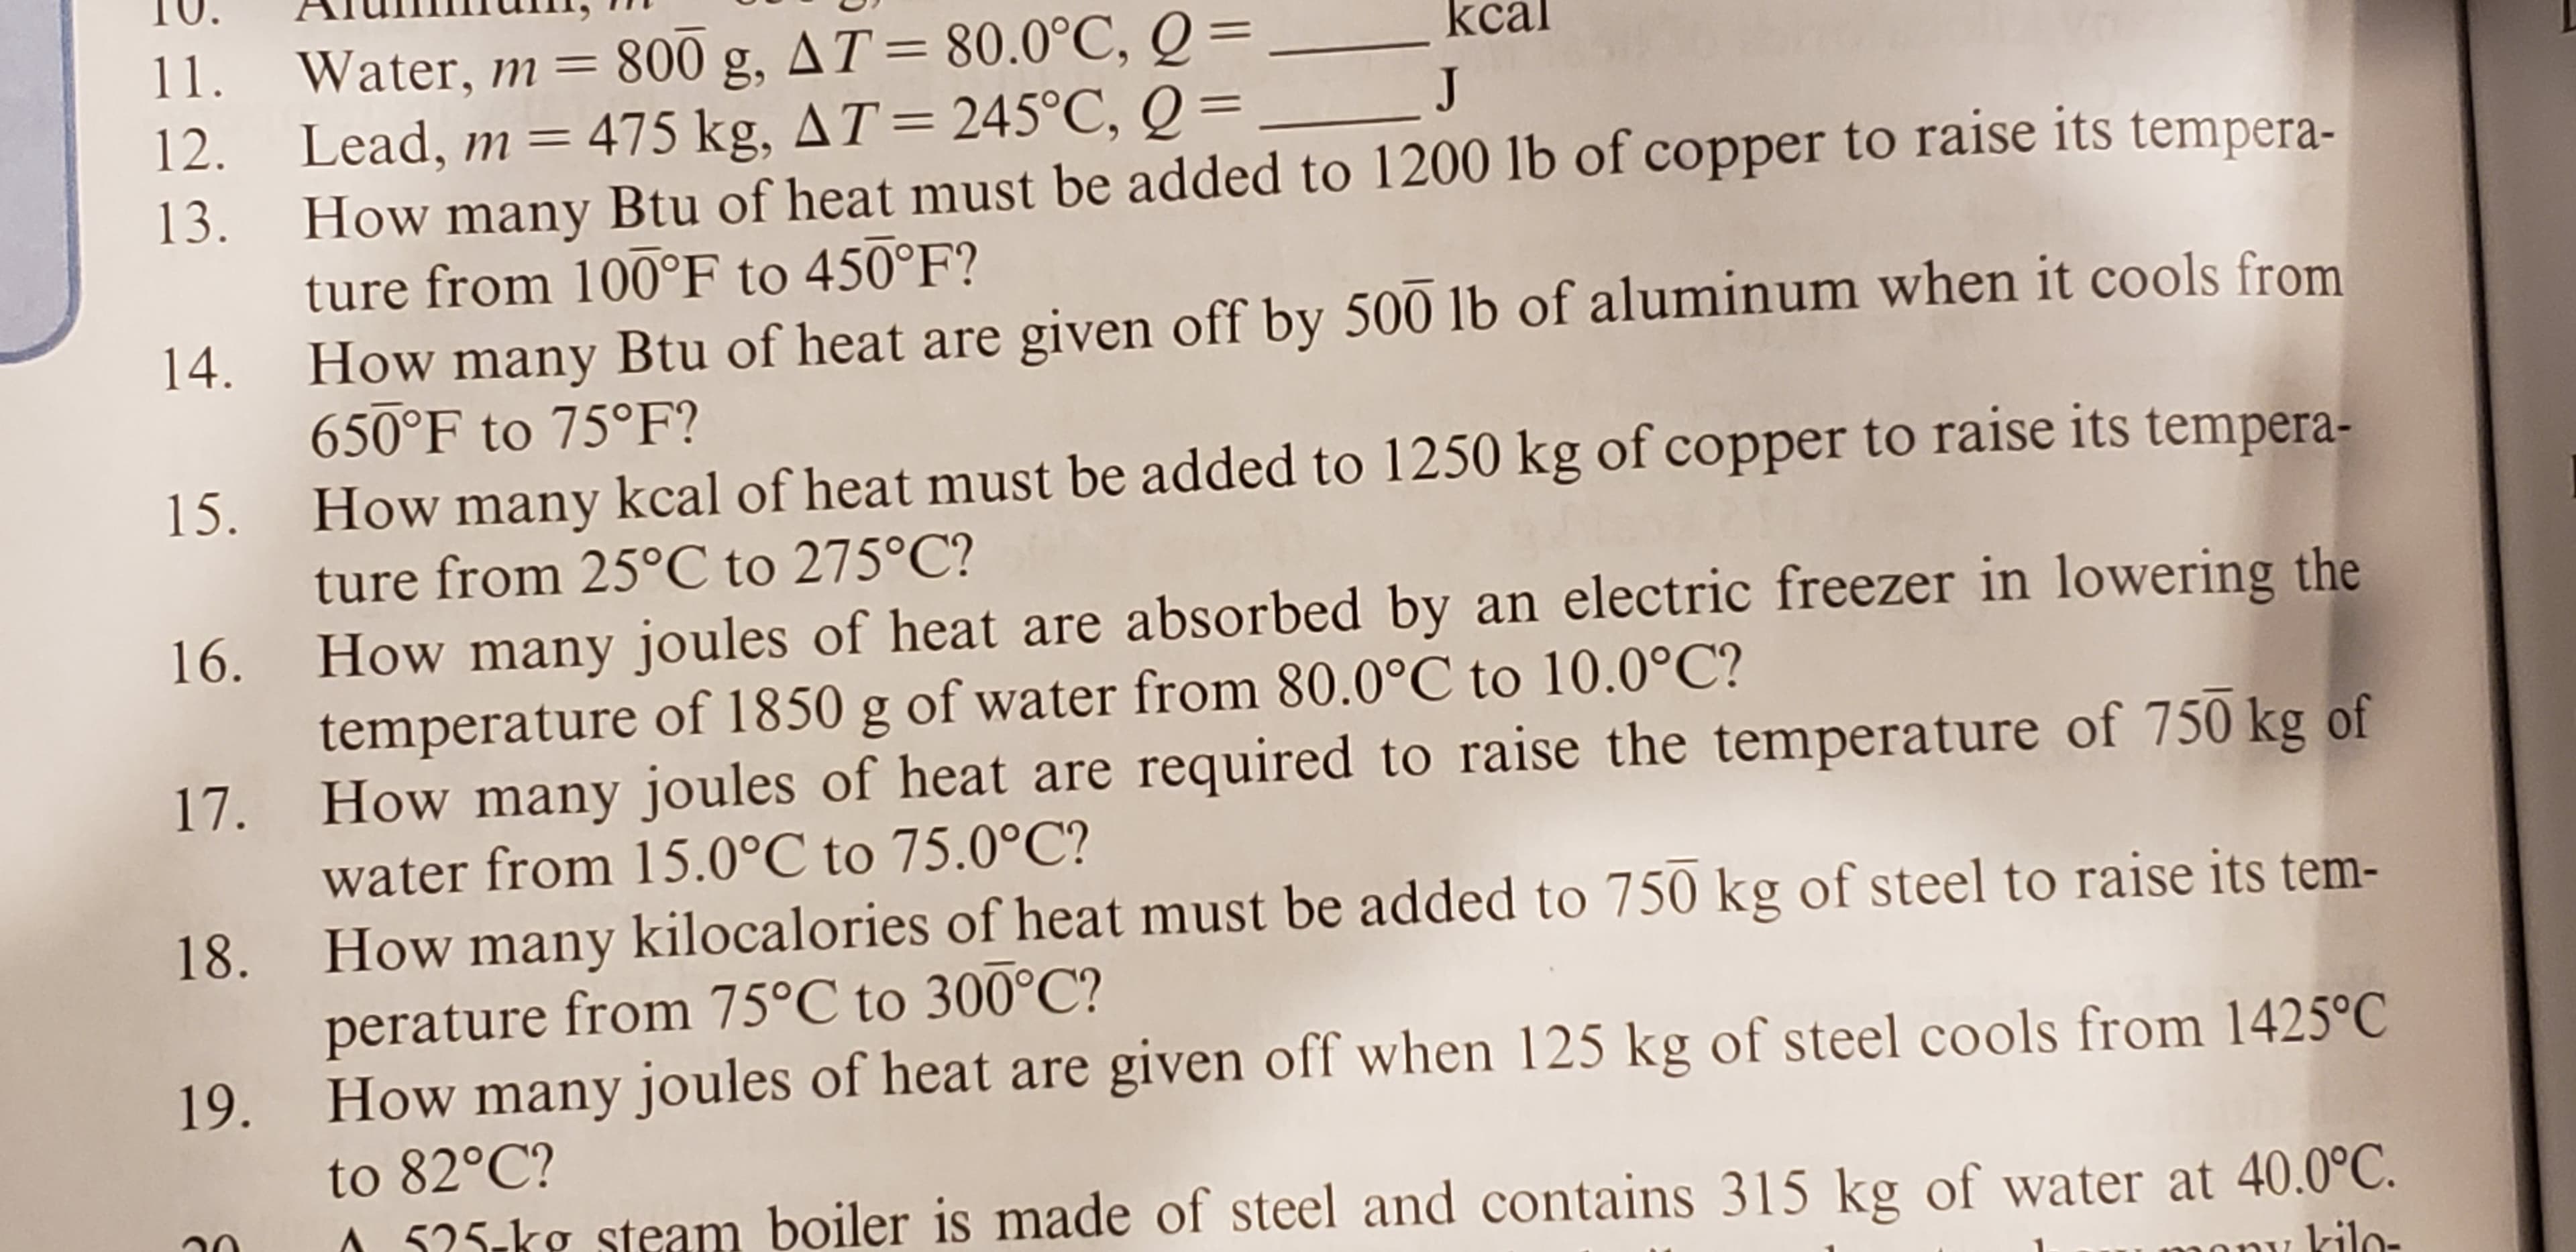 AT= 80.0°C, Q =
800 g
11.
Water, m =
Lead, m = 475 kg, AT = 245°C, Q =
How many Btu of heat must be added to 1200 lb of copper to raise its tempera-
ture from 100°F to 450°F?
J
12.
13.
How many Btu of heat are given off by 500 lb of aluminum when it cools from
650°F to 75°F?
14
How many kcal of heat must be added to 1250 kg of copper to raise its tempera-
ture from 25°C to 275°C?
15.
How many joules of heat are absorbed by an electric freezer in lowering the
temperature of 1850 g of water from 80.0°C to 10.0°C?
How many joules of heat are required to raise the temperature of 750 kg of
16.
17.
water from 15.0°C to 75.0°C?
How many kilocalories of heat must be added to 750 kg of steel to raise its tem-
perature from 75°C to 300°C?
How many joules of heat are given off when 125 kg of steel cools from 1425°C
18
19.
to 82°C?
525 kg steam boiler is made of steel and contains 315 kg of water at 40.0°C.
kilo-
